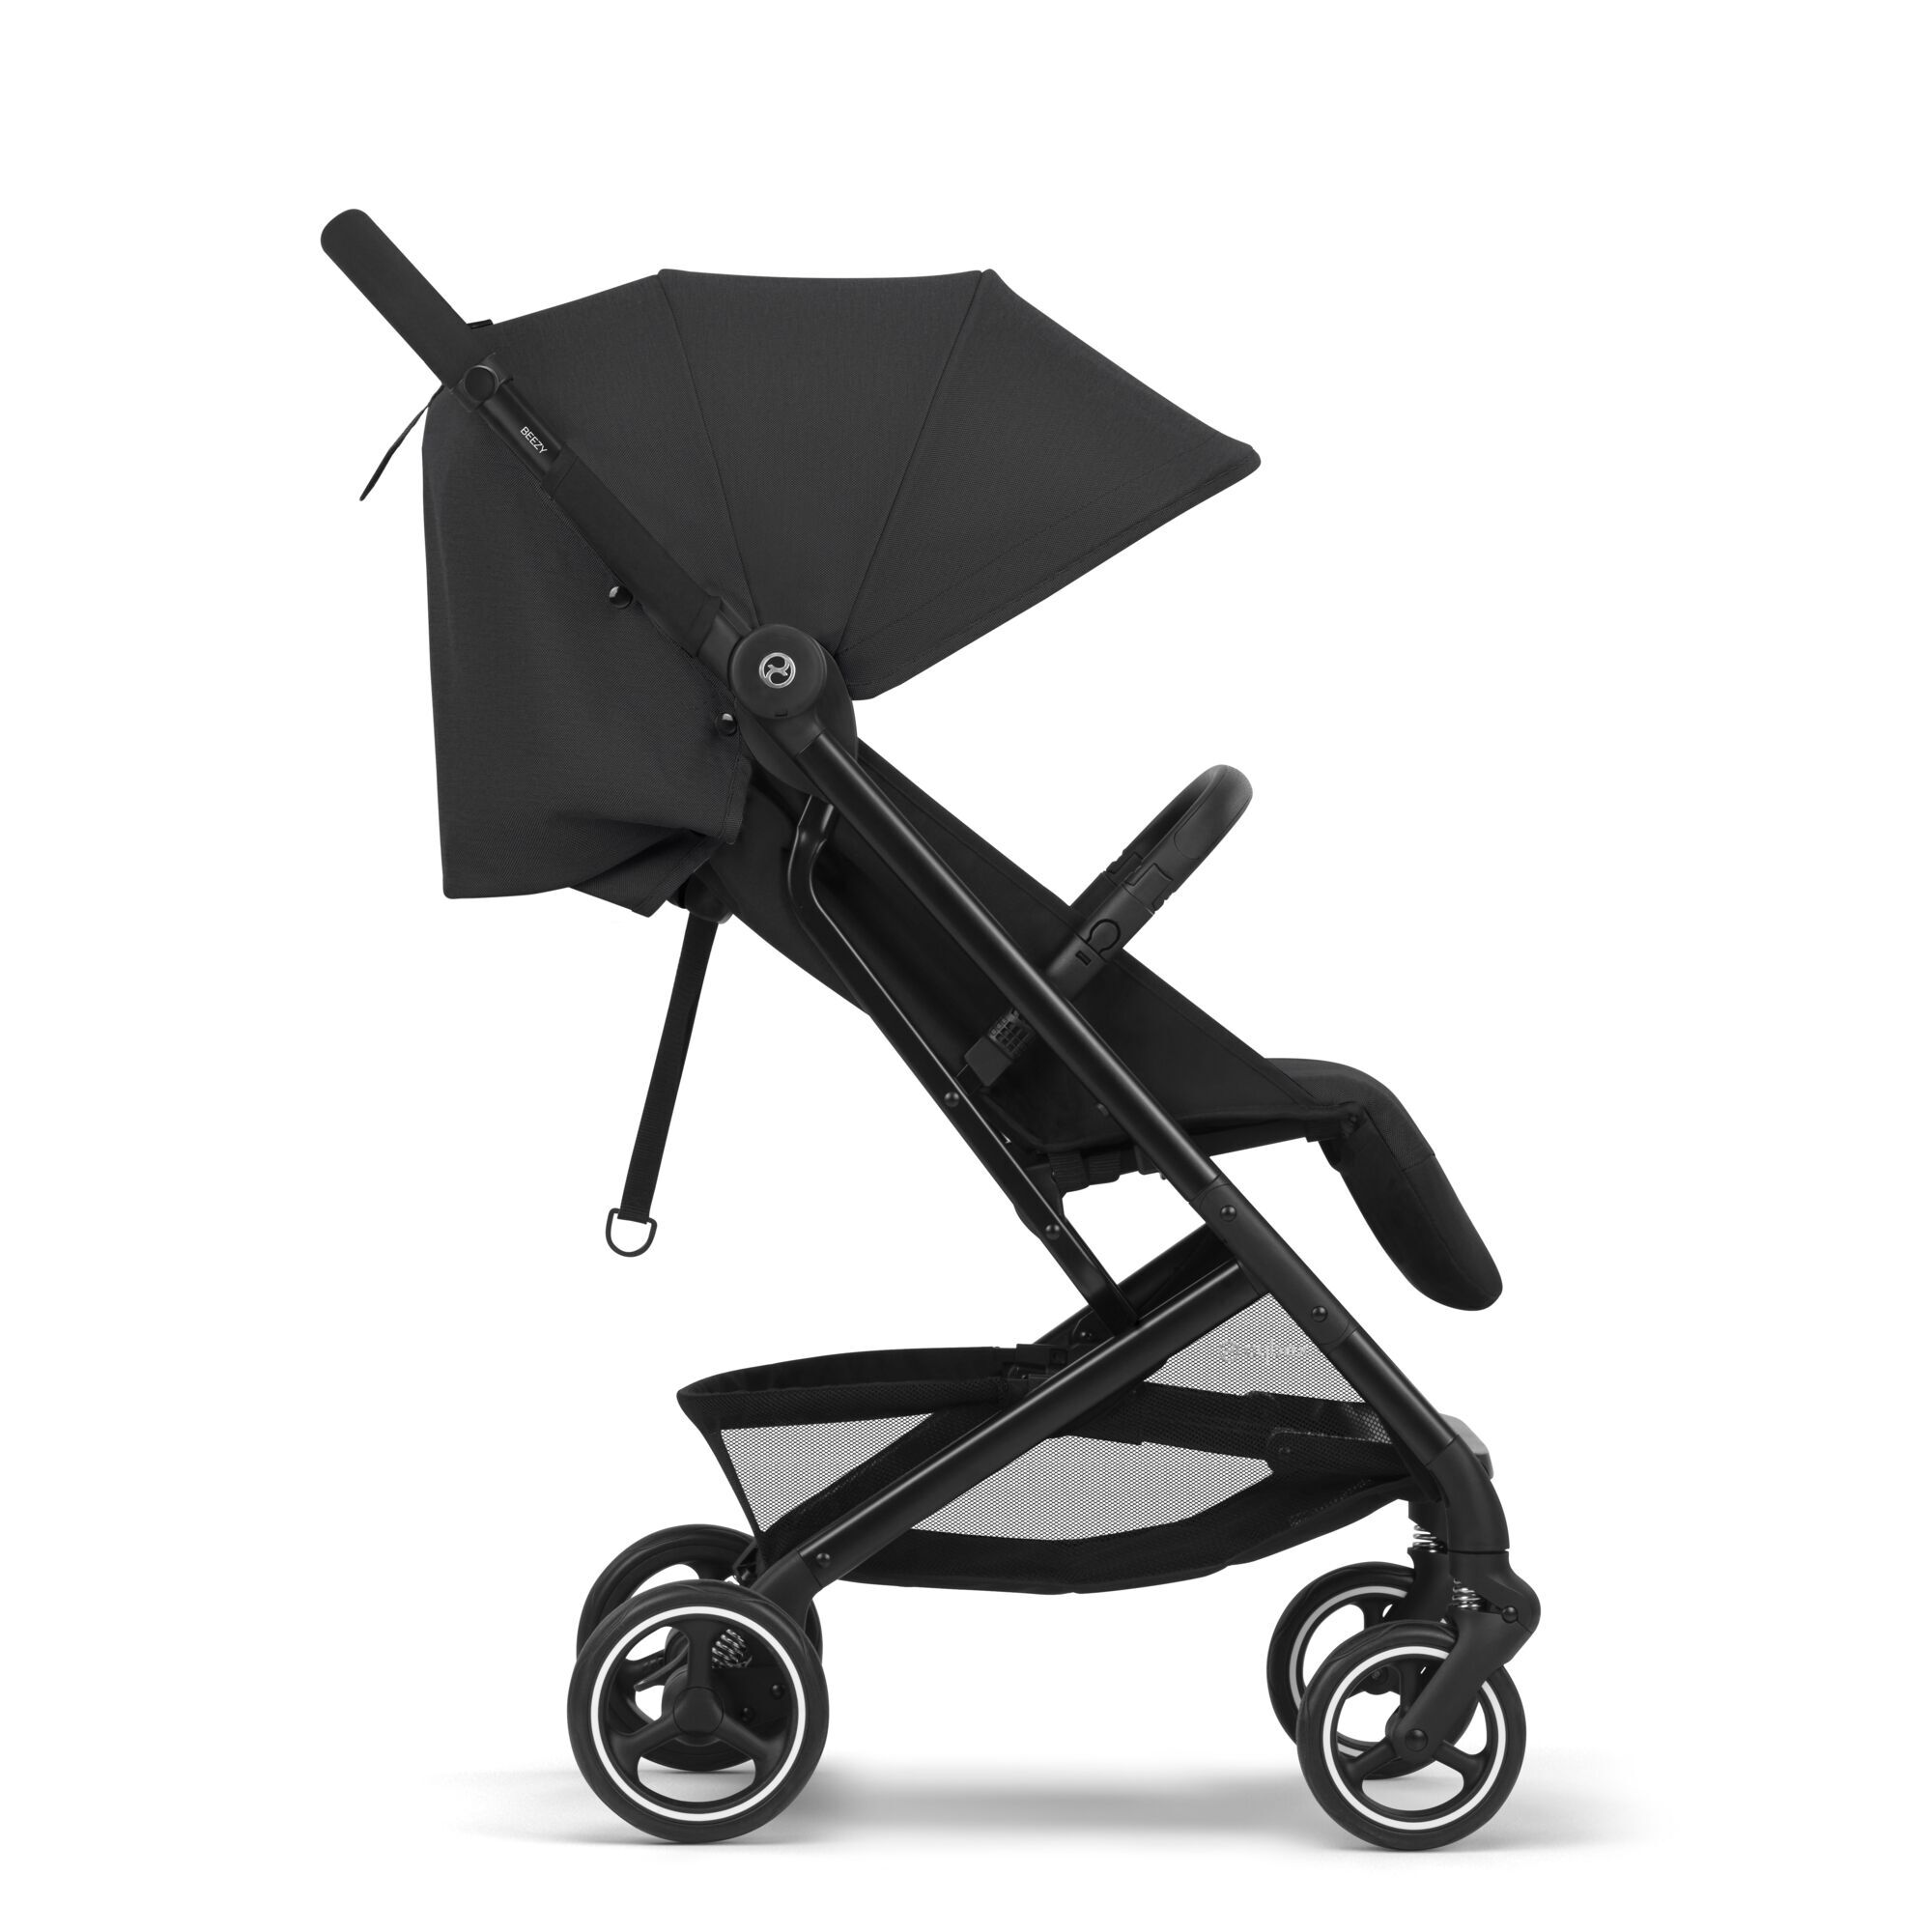 Lightweight Baby Stroller Compact Fold Stands for Storage Compatible with All CYBEX Infant Seats Multiple Recline Positions Travel Stroller Deep Black Easy to Carry CYBEX Beezy Stroller 